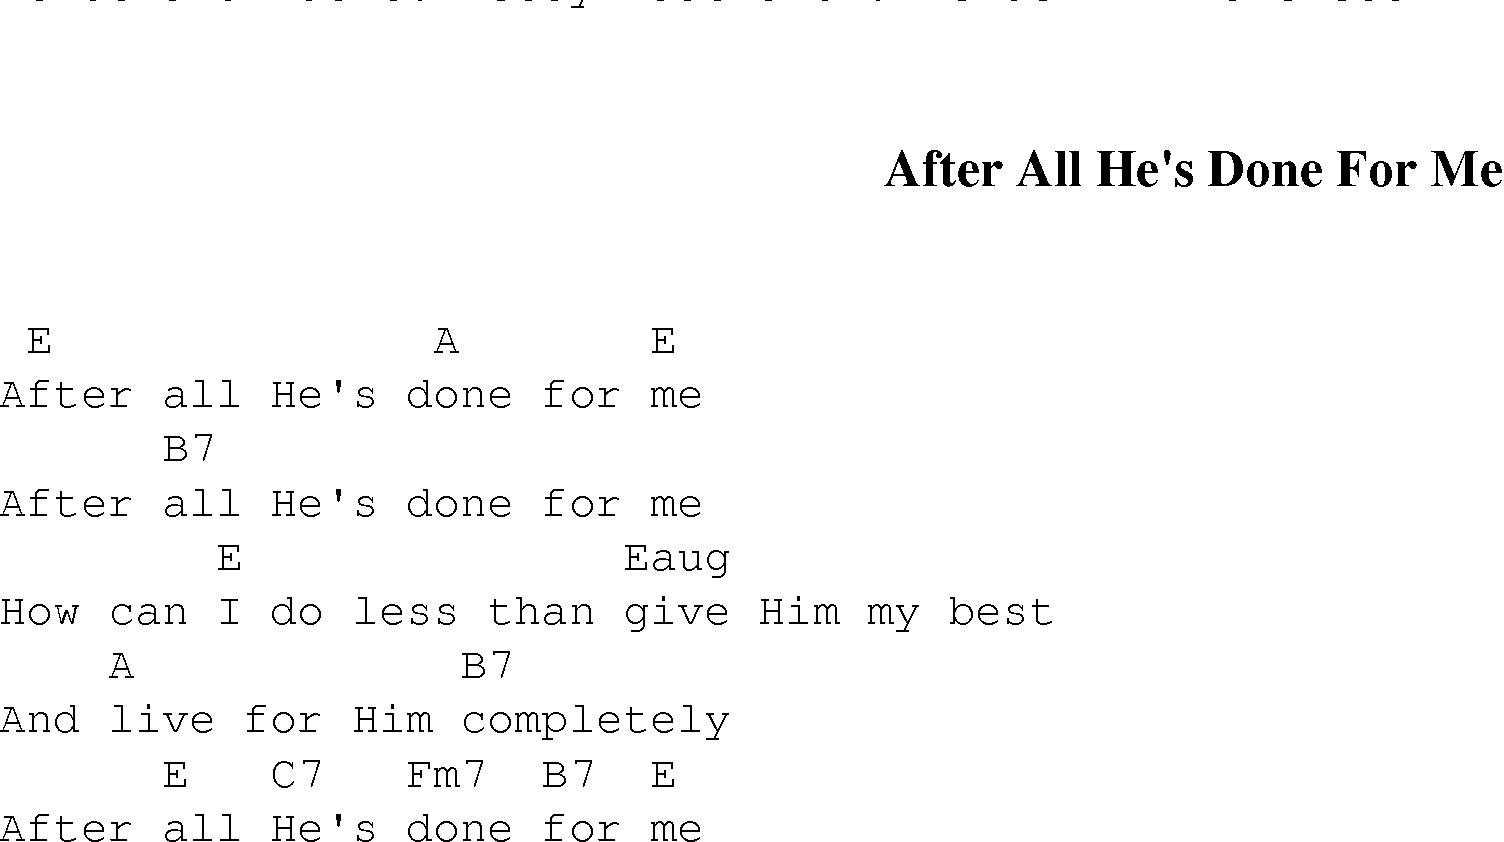 Gospel Song: after_all_hes_done, lyrics and chords.